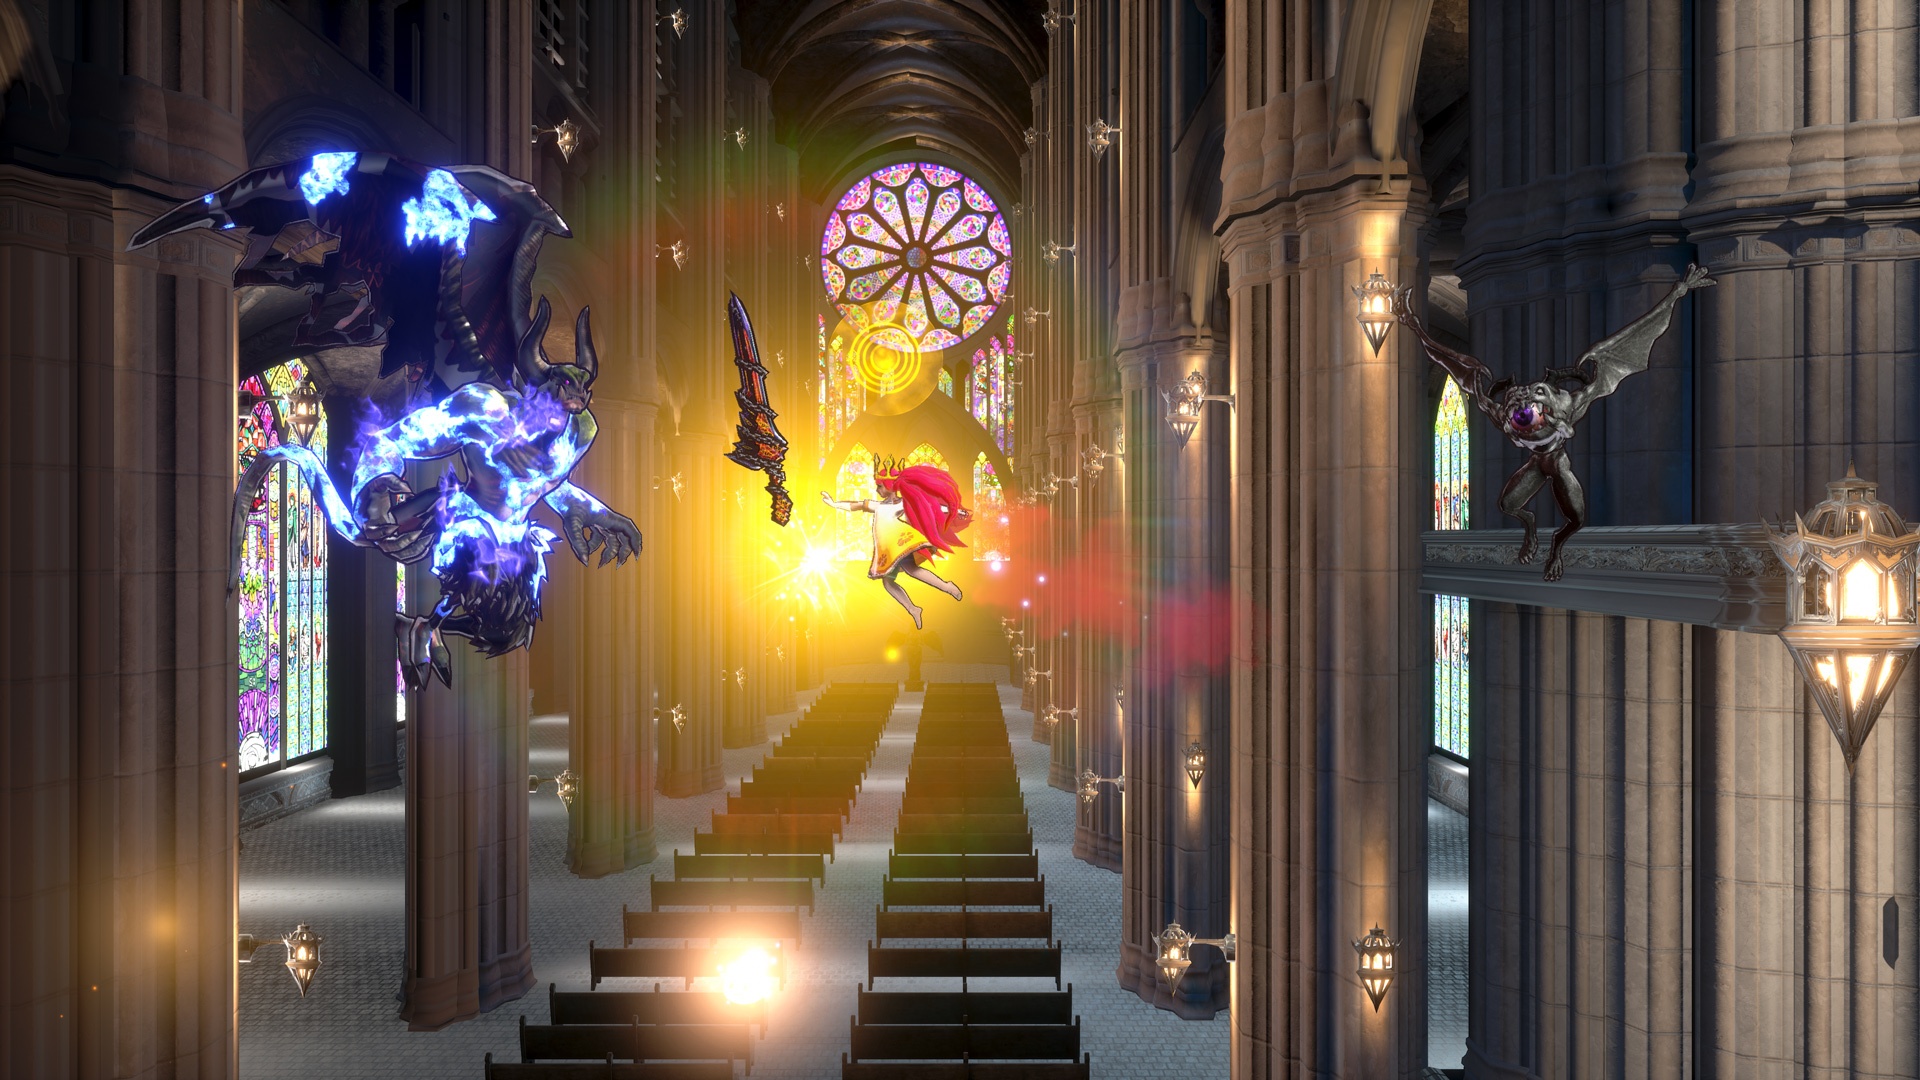 Bloodstained: Ritual of the Night adds a Child of Light character